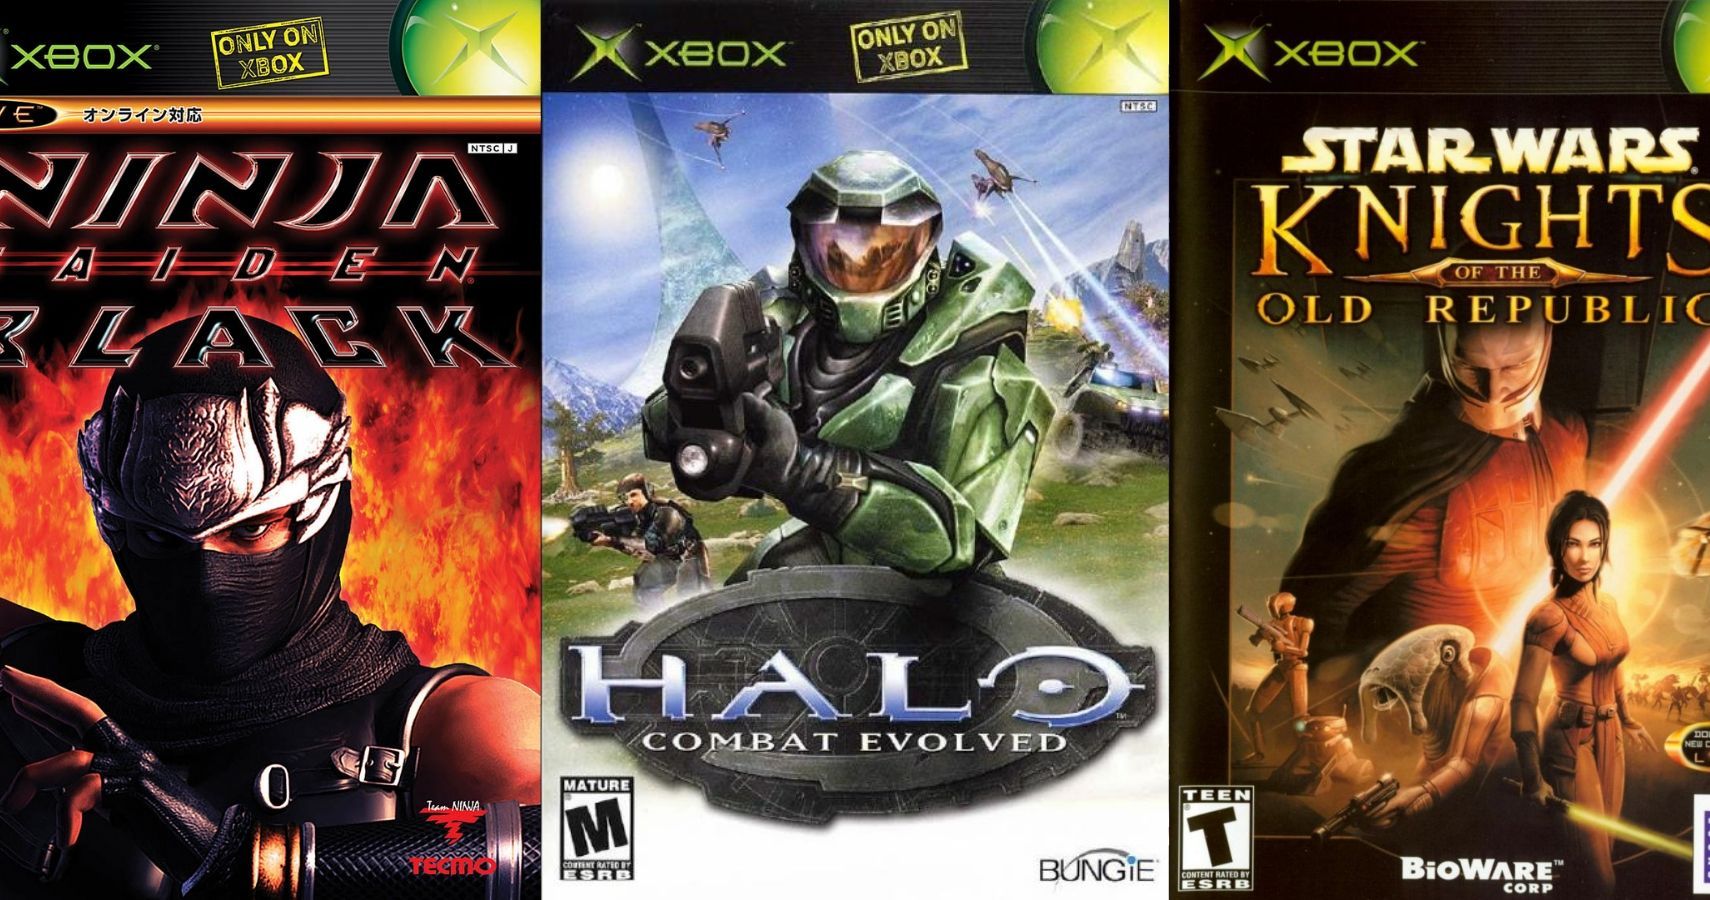 10 Of The Best Xbox Original Games Of All Time (Based On Metacritic Score)